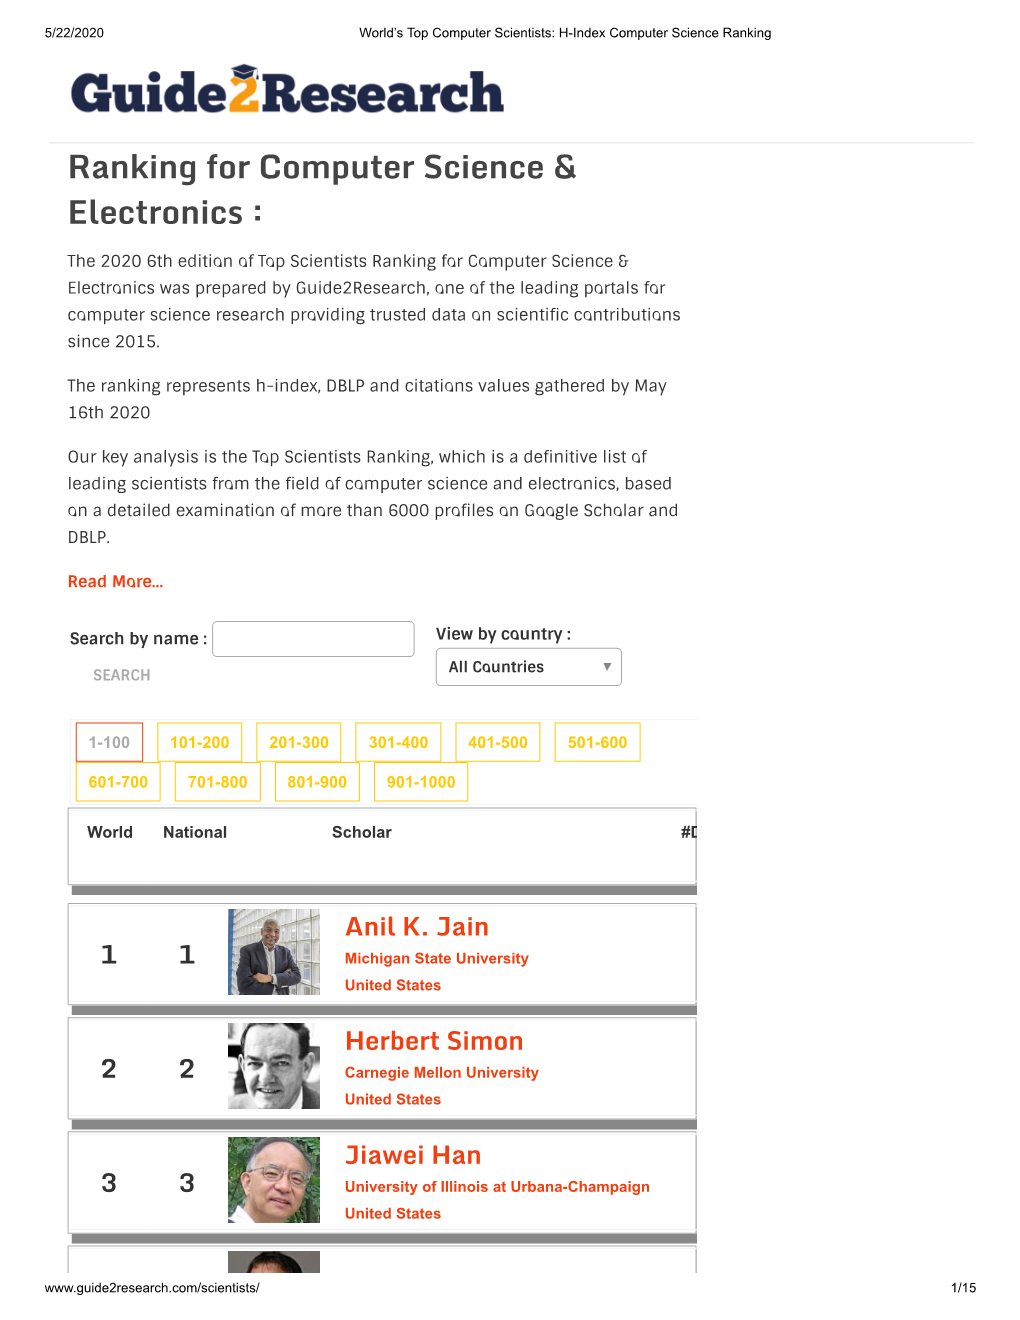 Ranking for Computer Science & Electronics